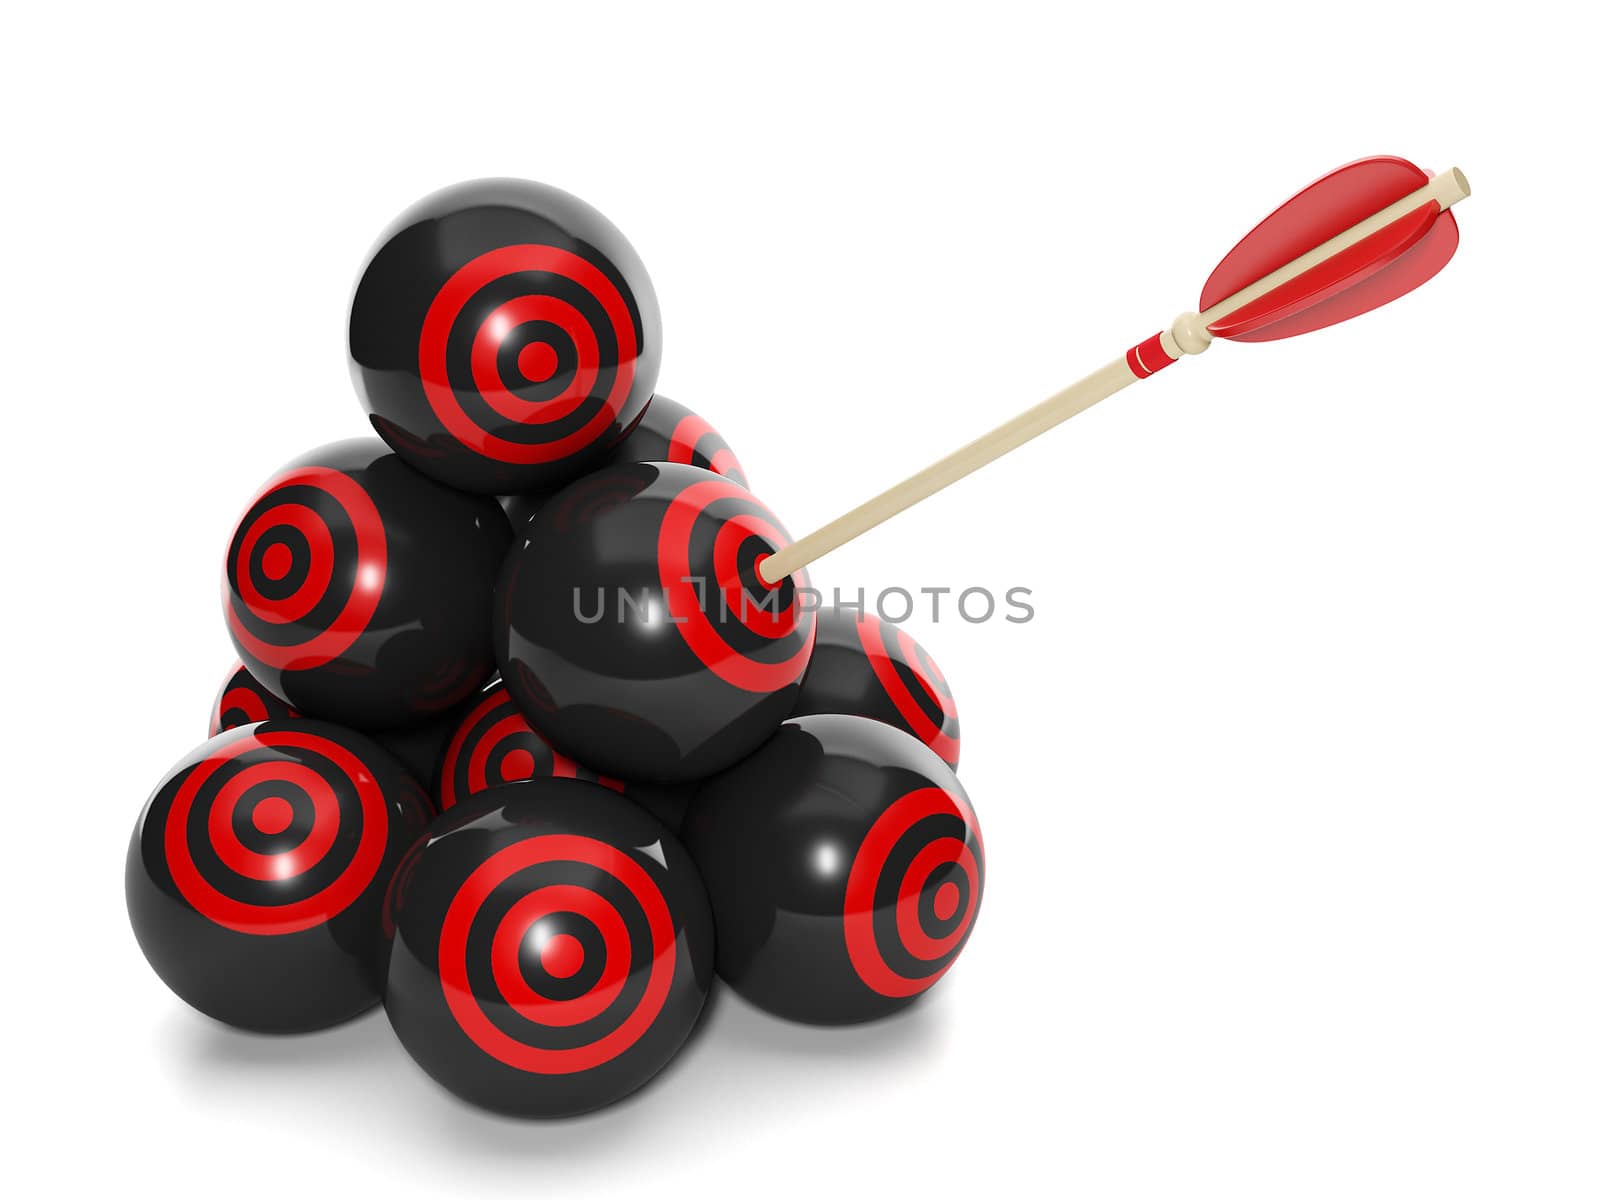 3d Illustration: Business concept. Group of balls with a target and arrow in one, choose the right solution